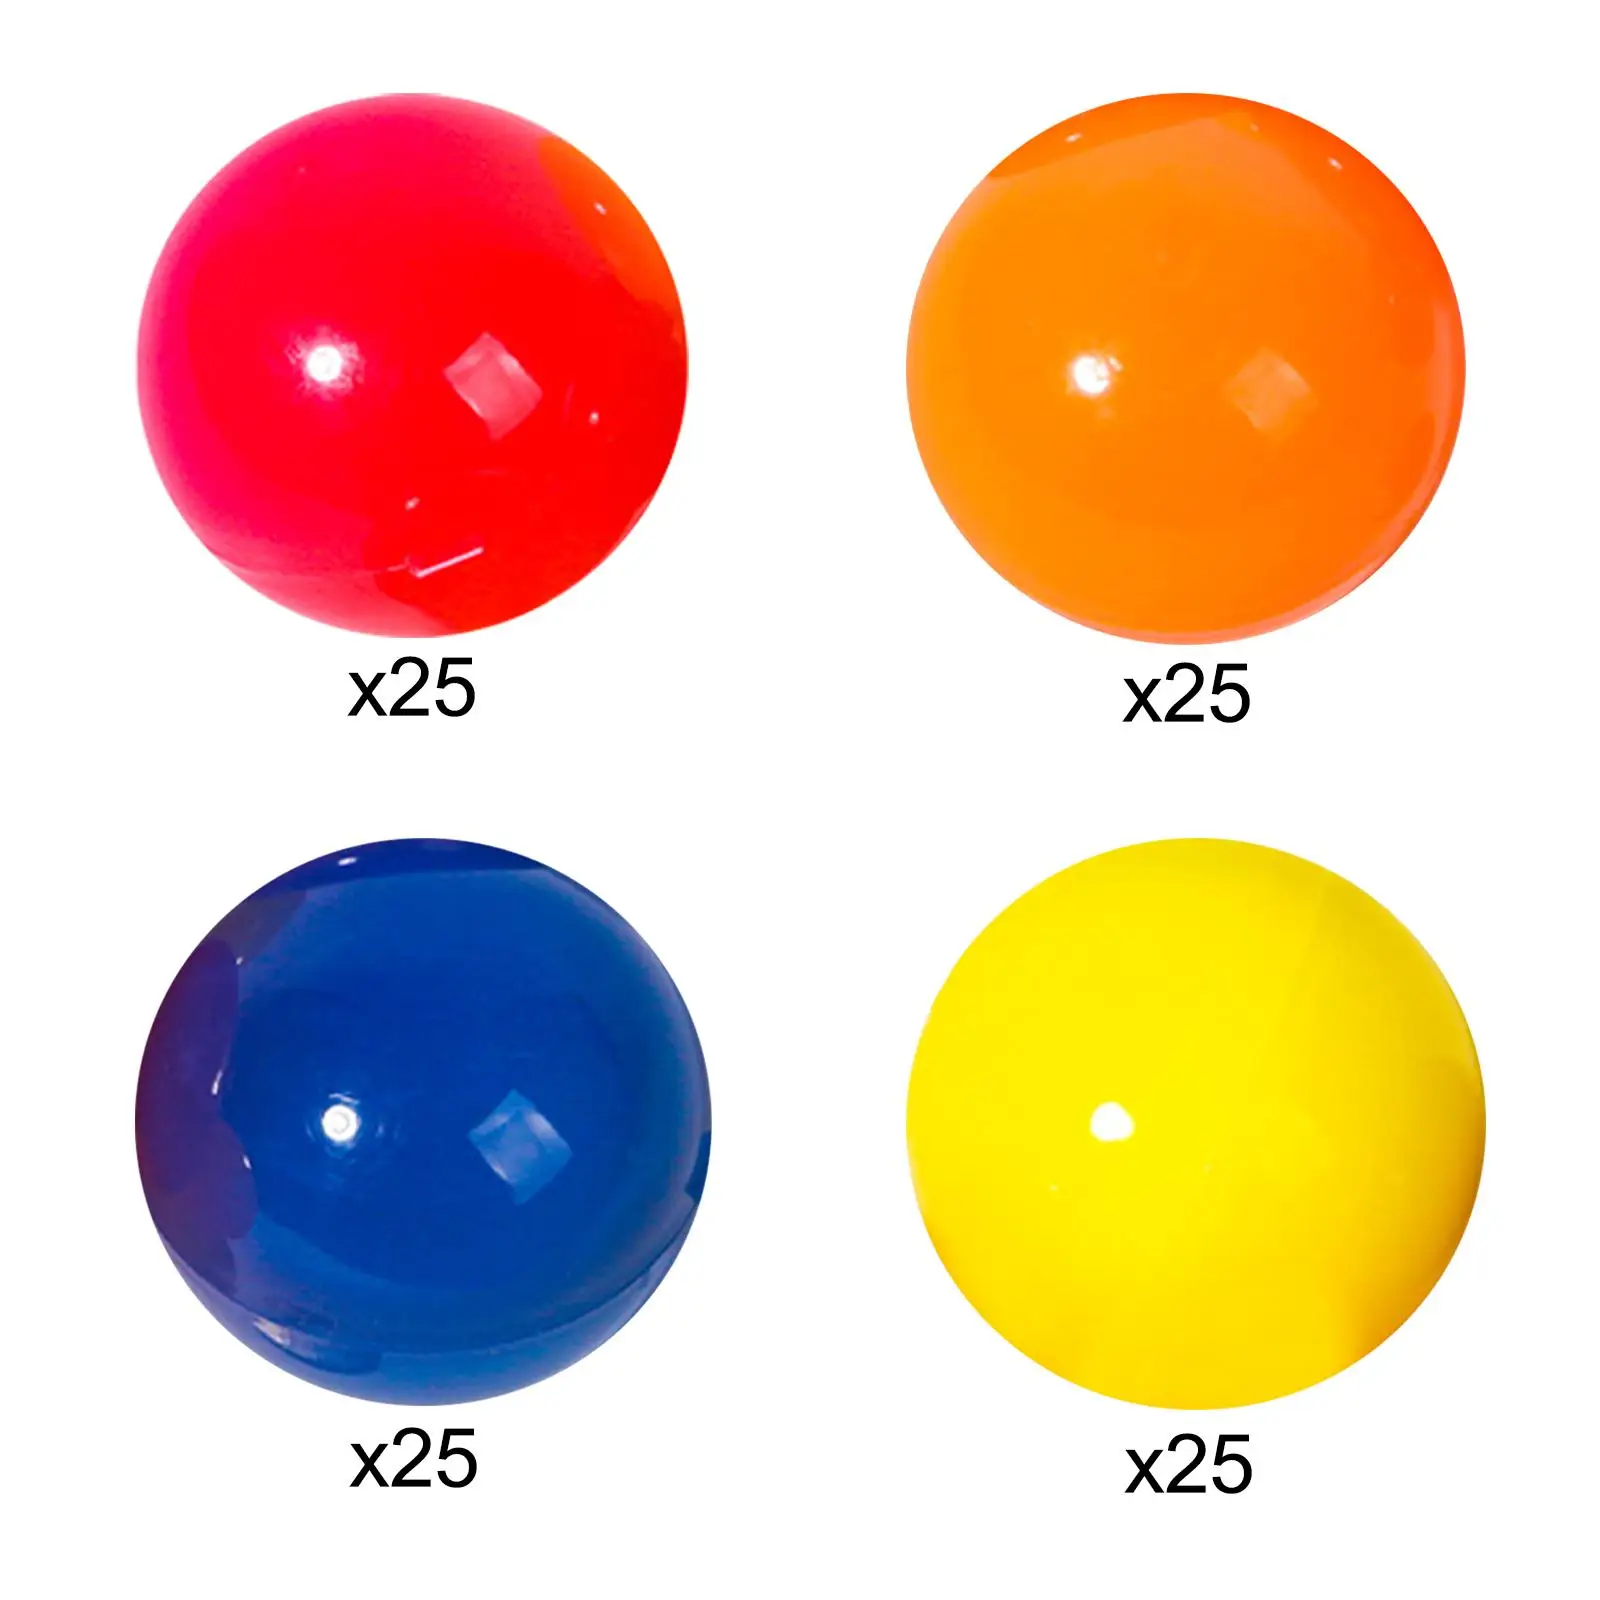 25 Pieces Bingo Ball Devices Durable Direct Replaces Calling Balls for Regal Game Large Group Games Family Entertainment Nights